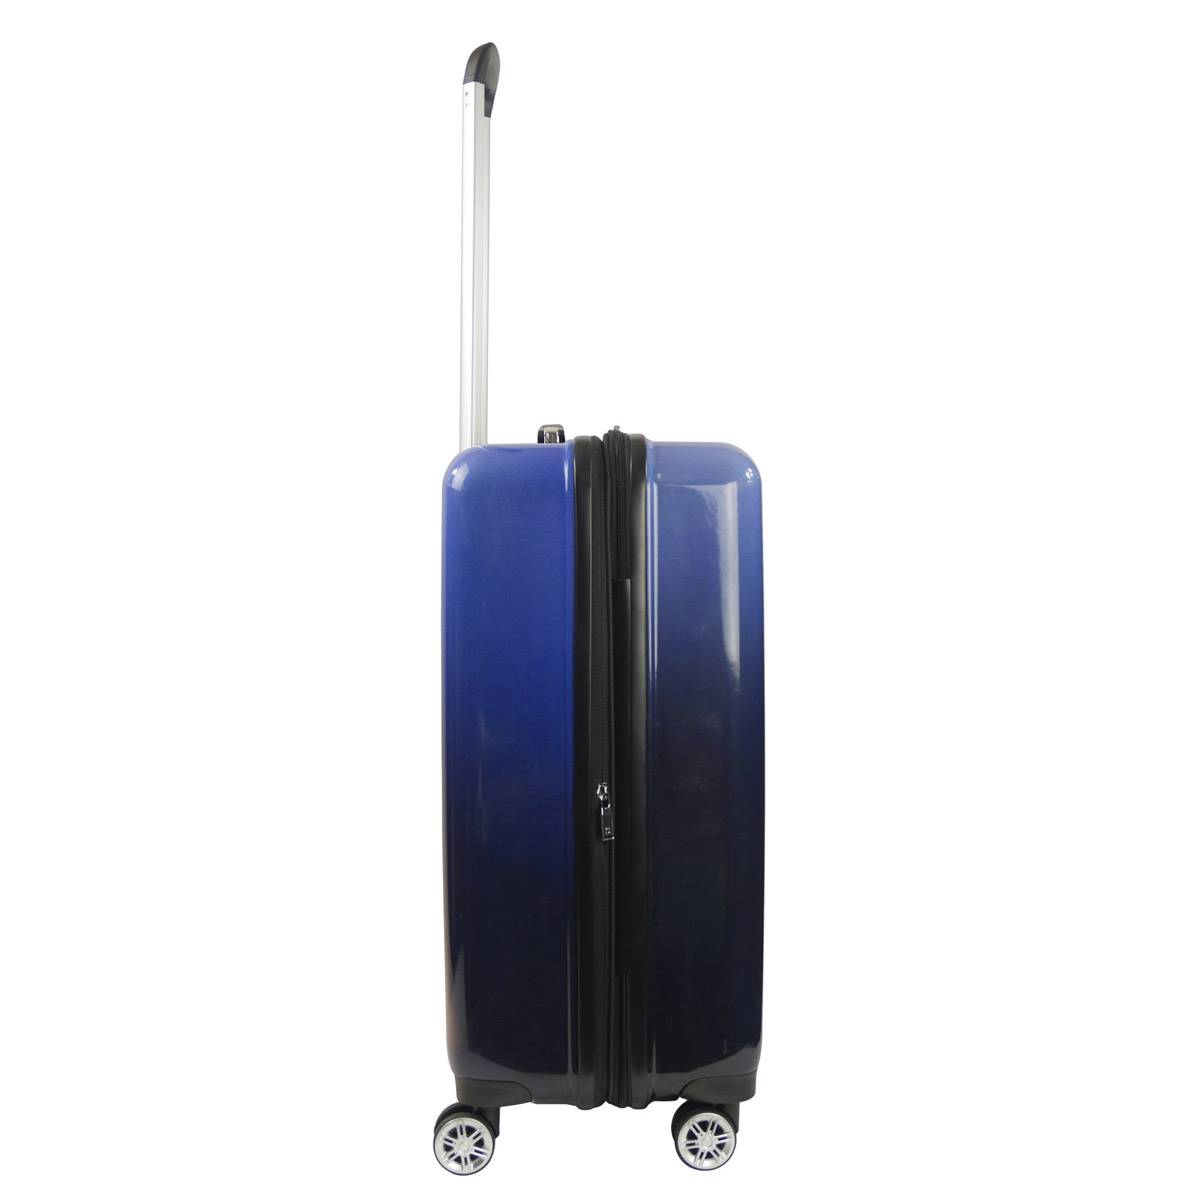 FUL 26in. Impulse Ombre Hardside Spinner Luggage